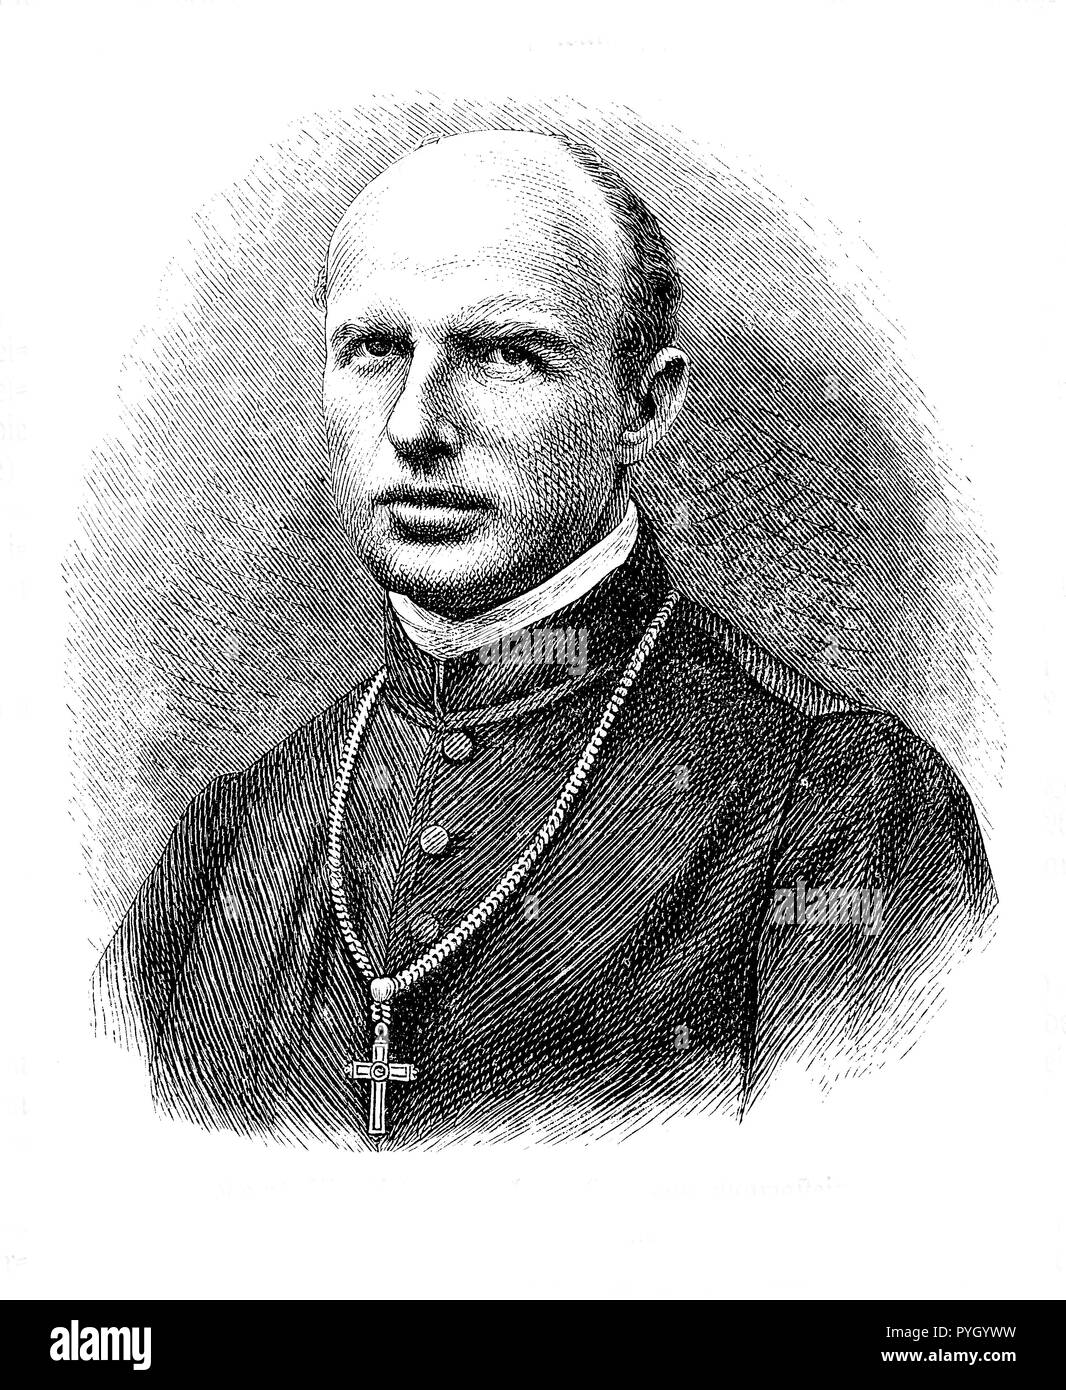 Engraving portrait of  Karl Motschi, abbot from 1873 to 1900 of Mariastein, benedictine monastery in Solothurn canton in Switzerland Stock Photo